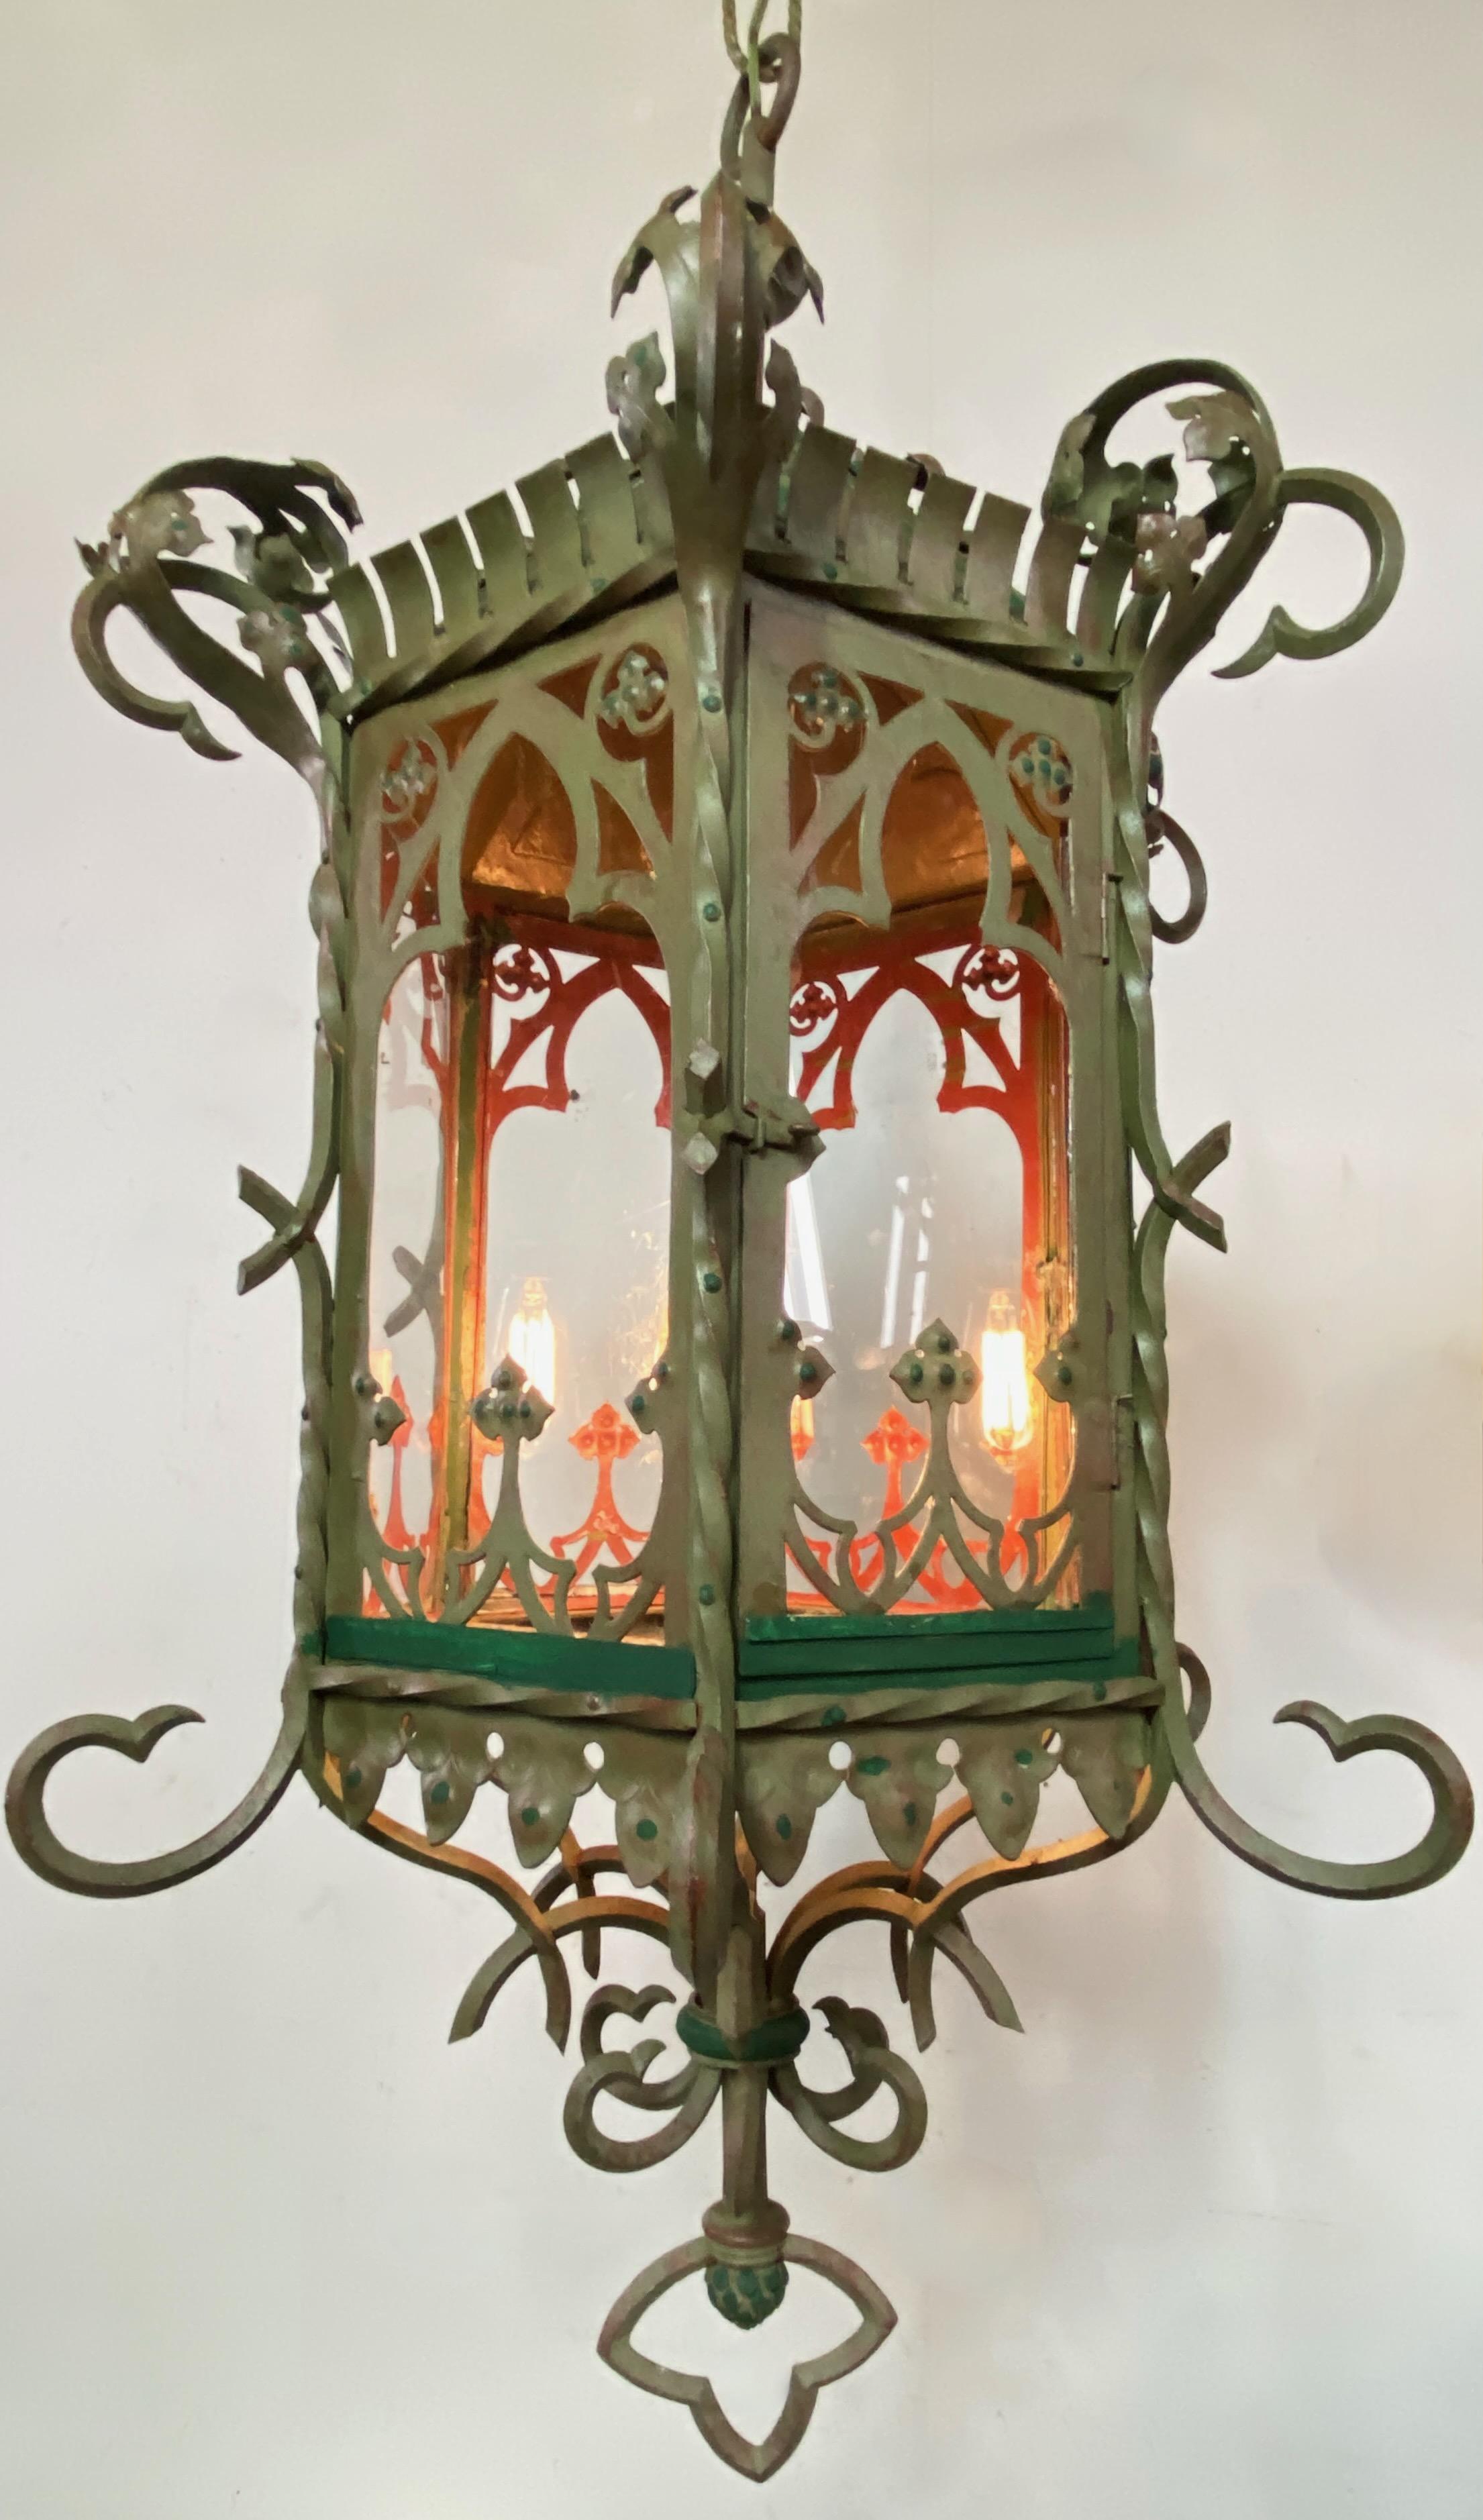 Antique Asian Inspired Iron and Steel Lantern In Good Condition For Sale In San Francisco, CA